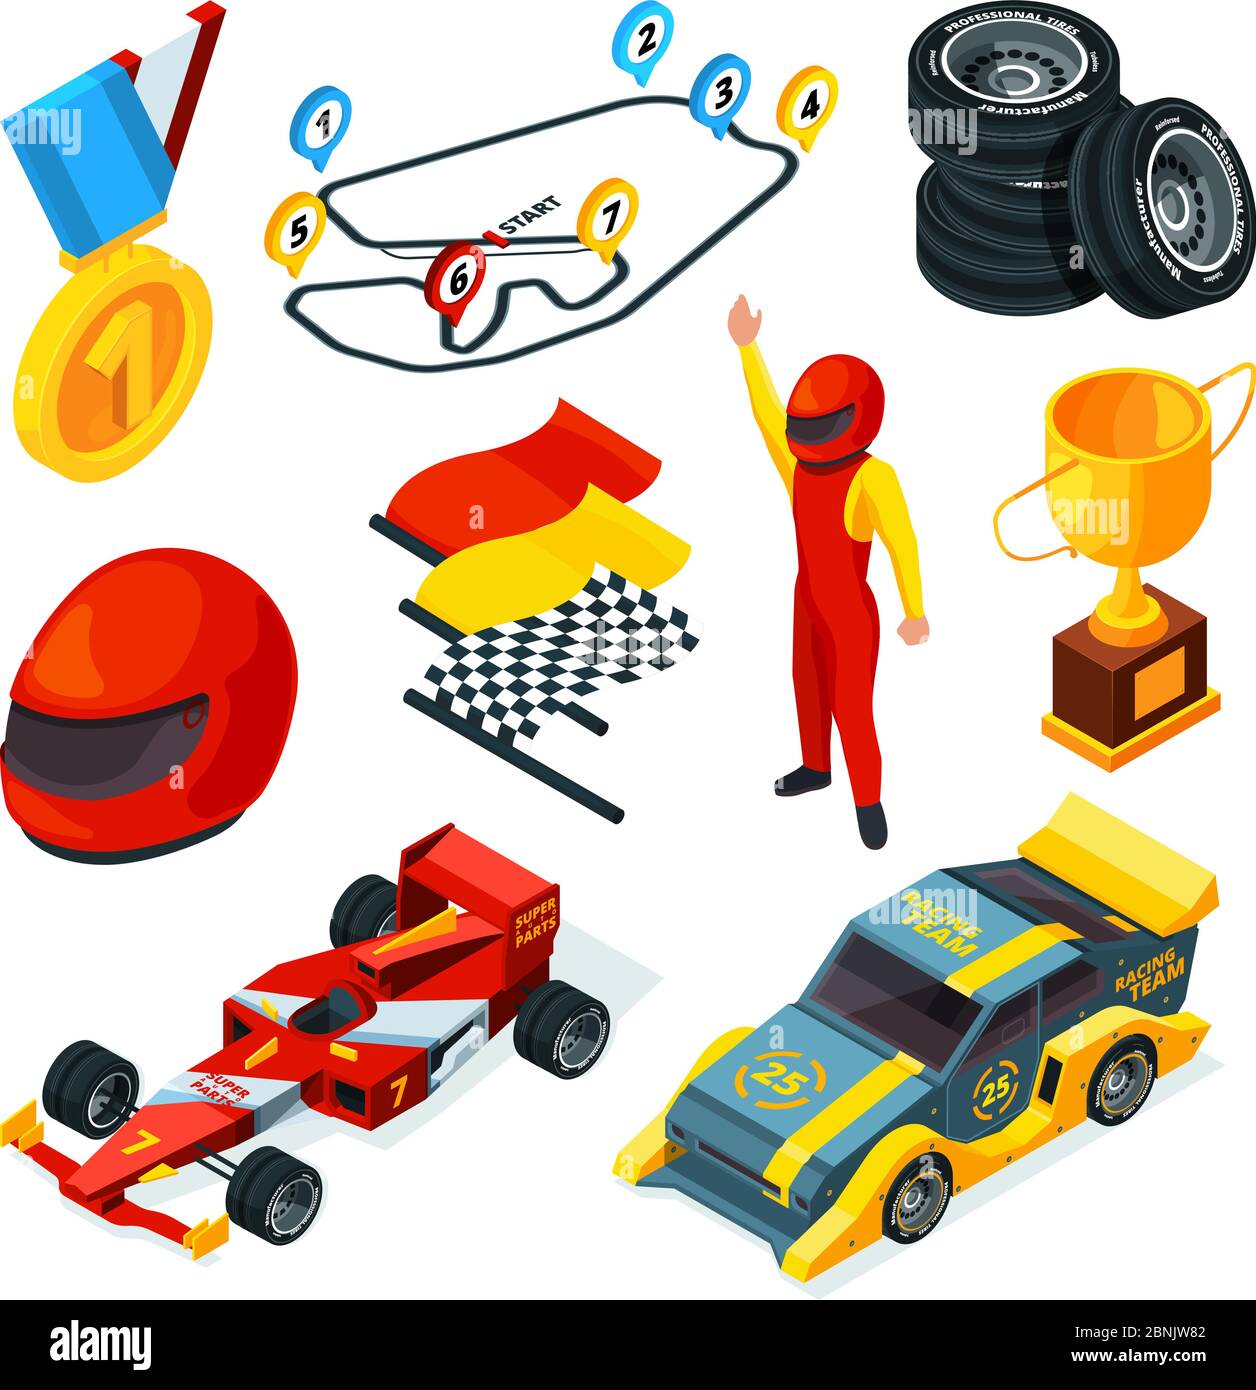 Sport racing symbols. Isometric pictures of racing cars and formula 1 symbols Stock Vector